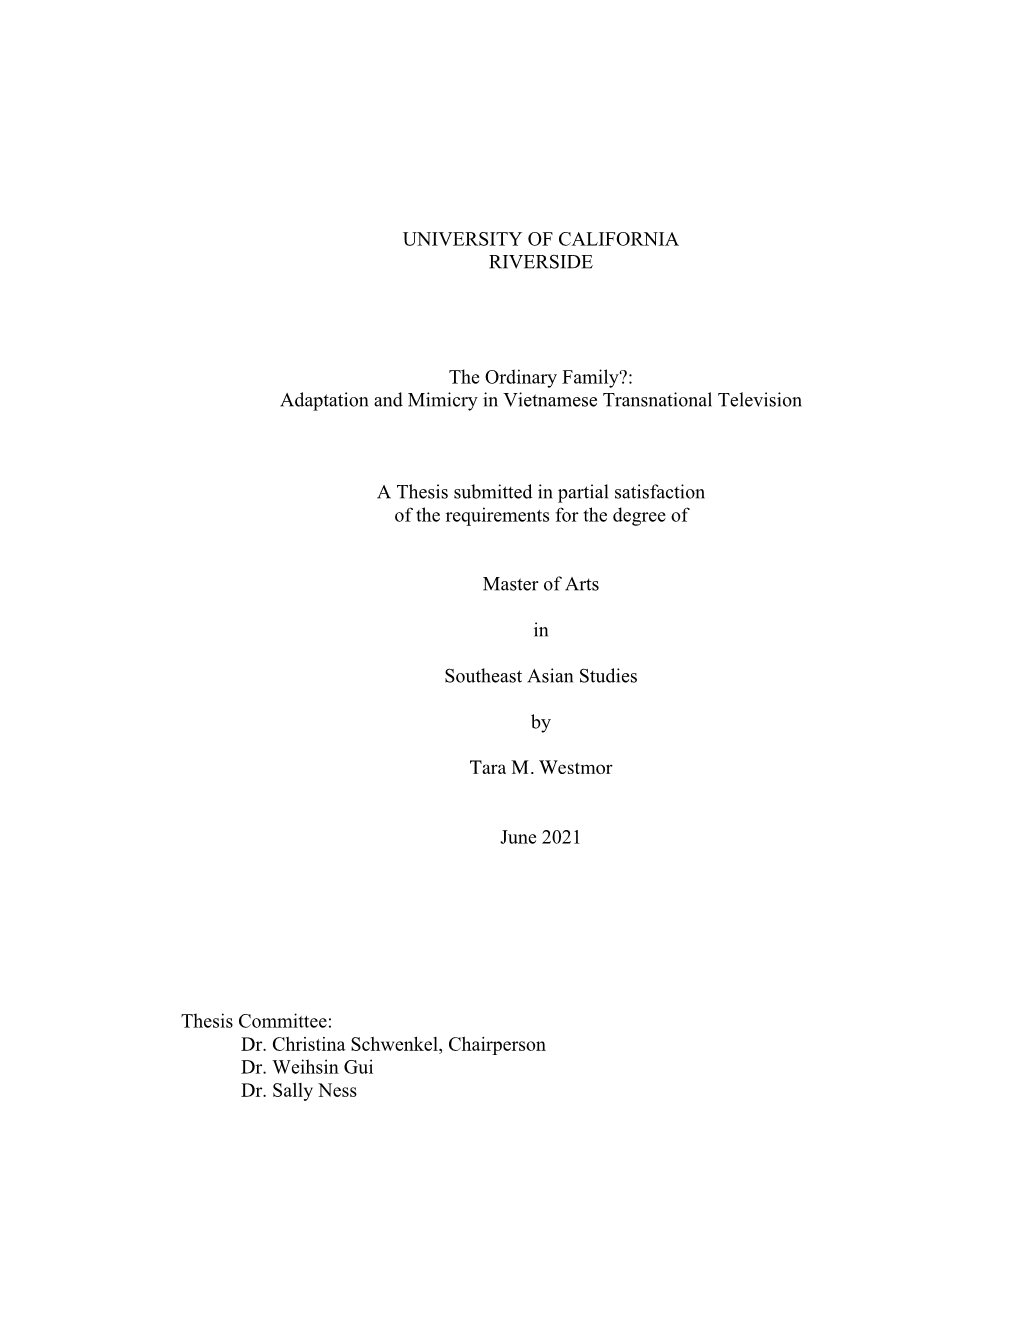 Adaptation and Mimicry in Vietnamese Transnational Television a Thesis